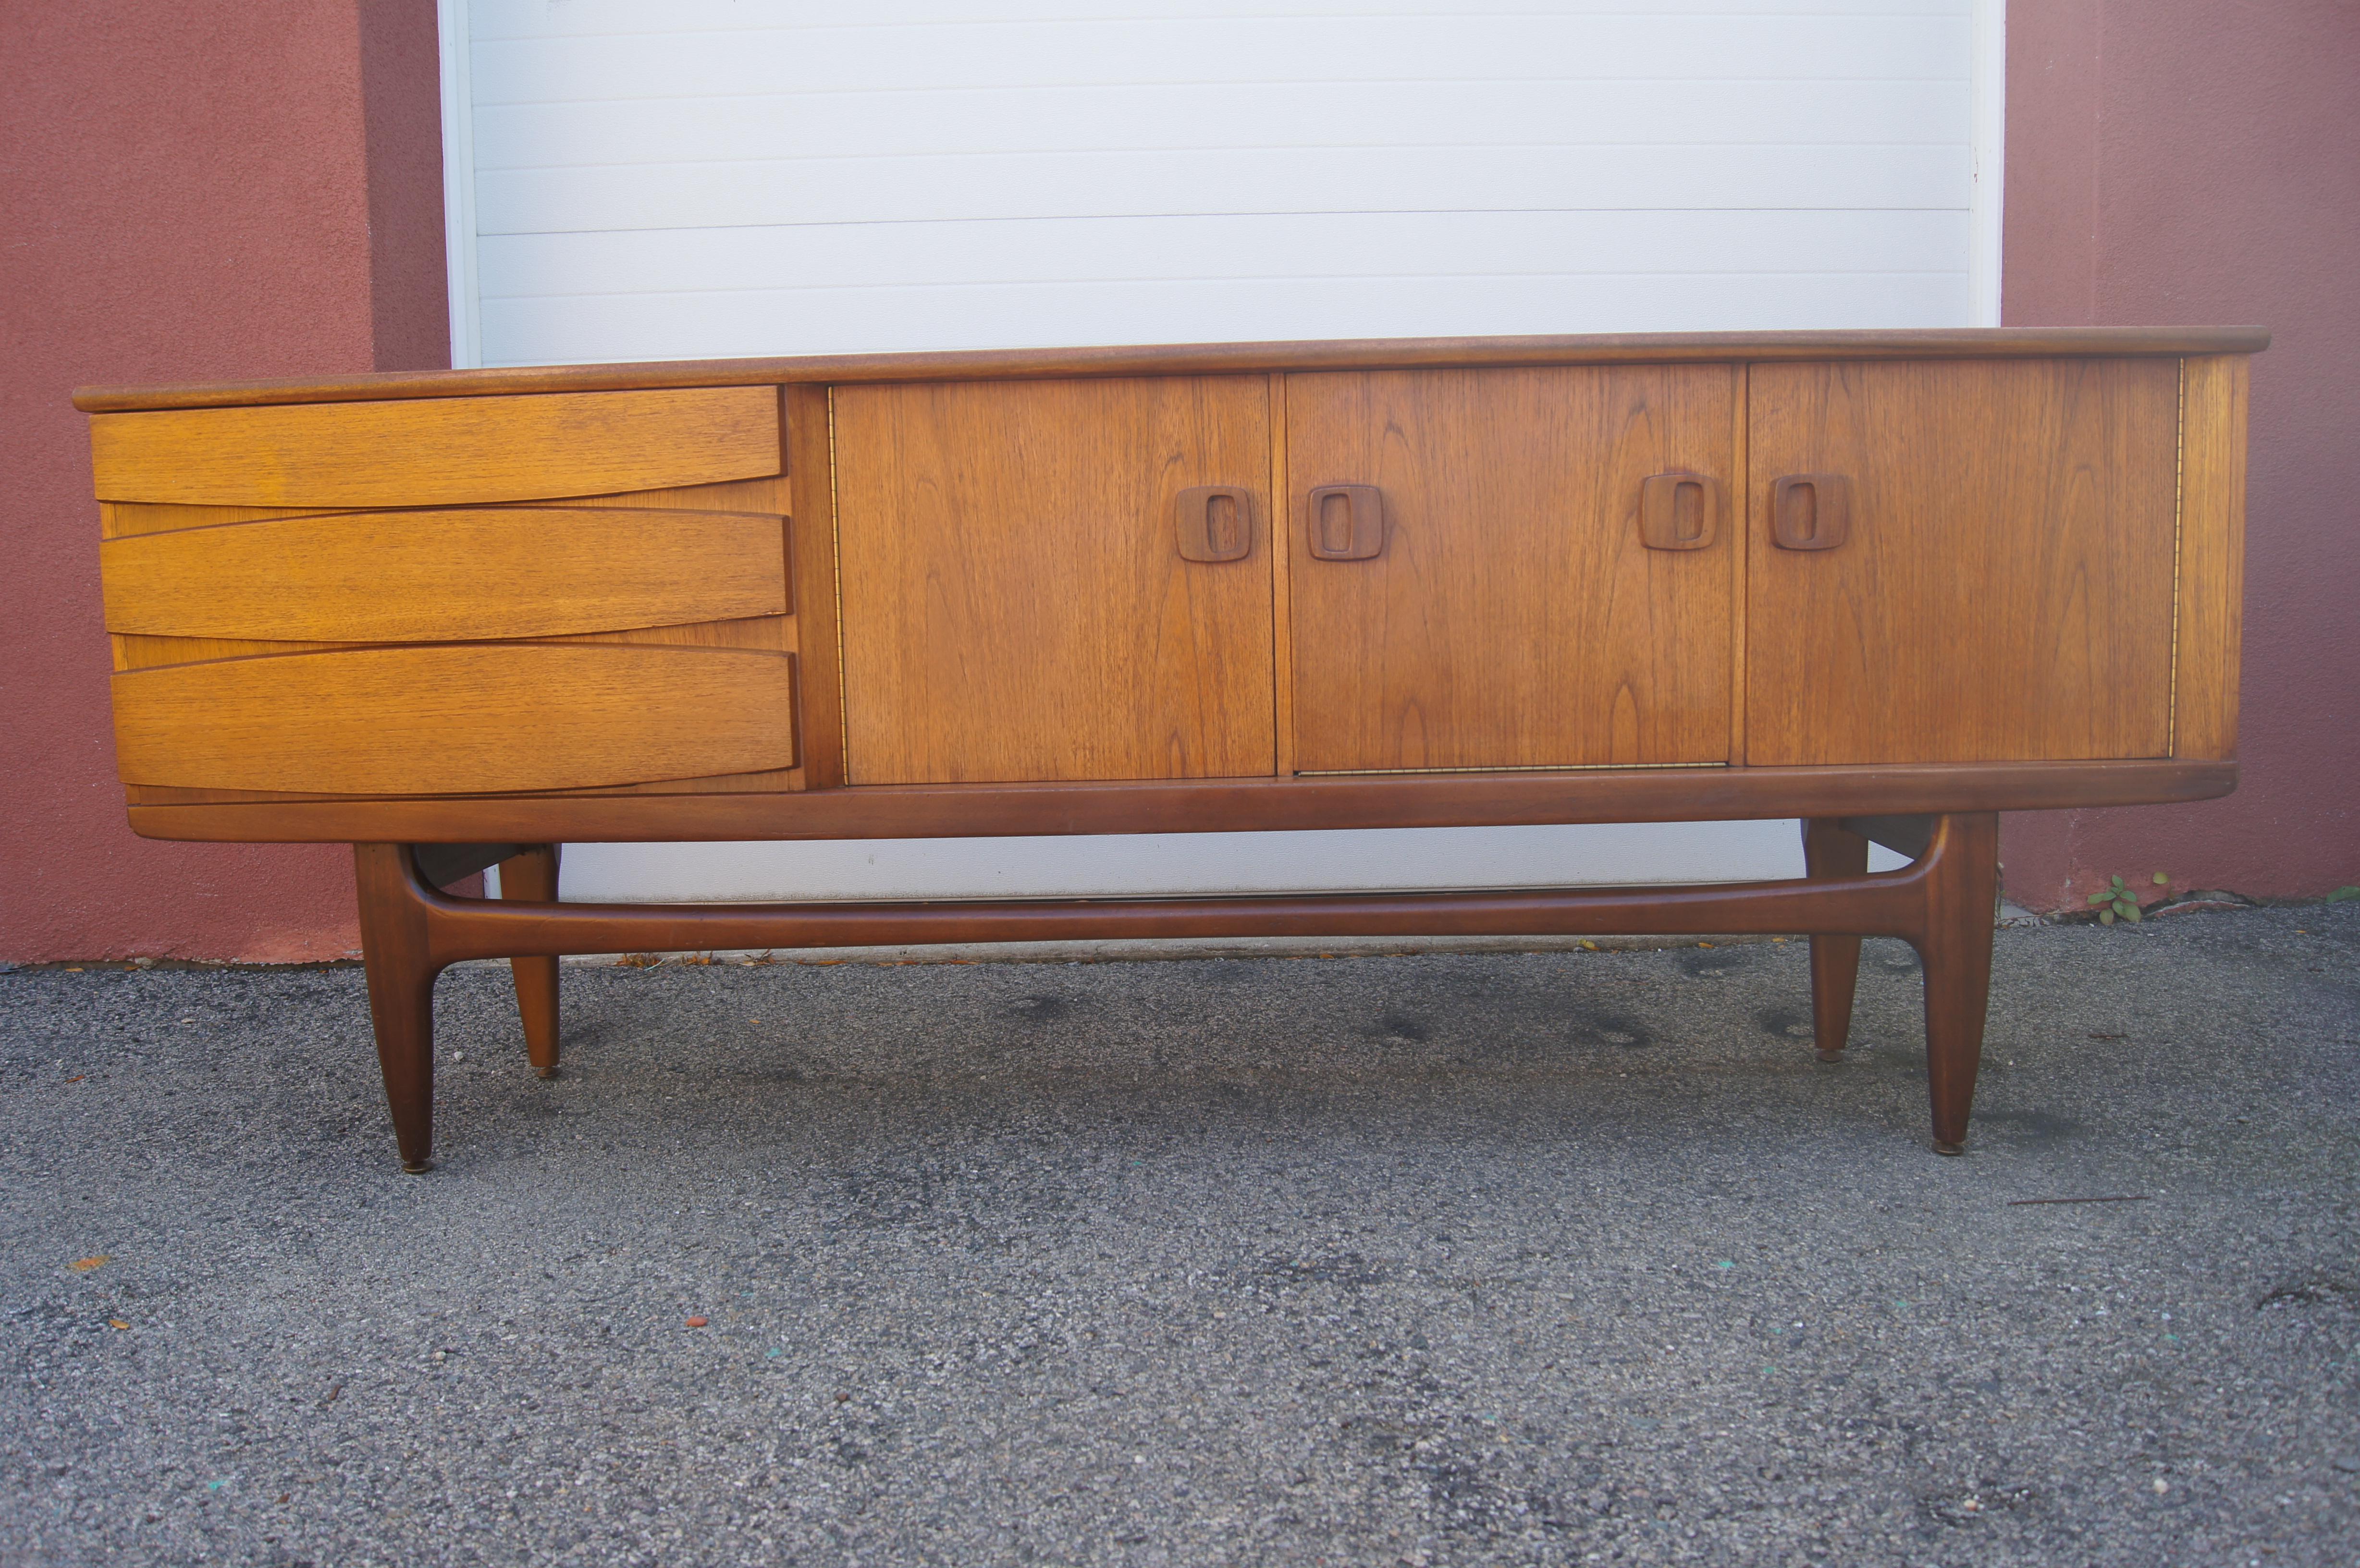 A beautiful example of Danish modernism, this wide teak sideboard features three drawers with shaped fronts and two doors that conceal adjustable shelving on either side of a drop-down door that hides white laminate shelving. The case sits on a